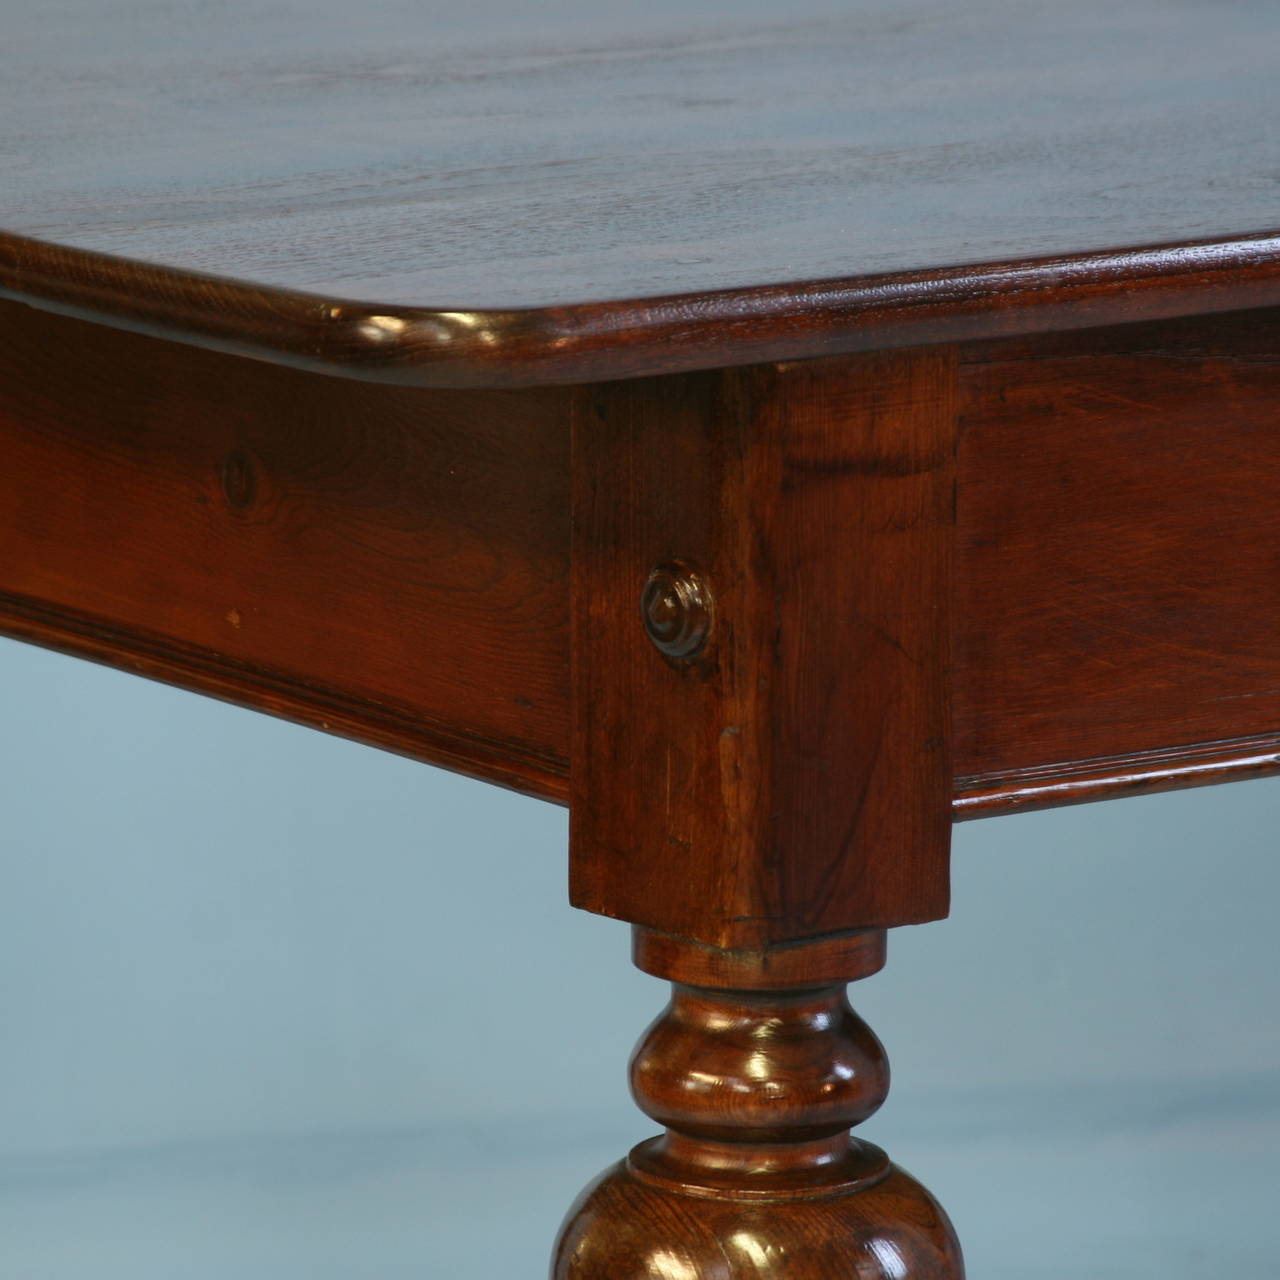 Mid-19th Century Antique Long Library Table Console Table with 6 Legs, Denmark circa 1860-80